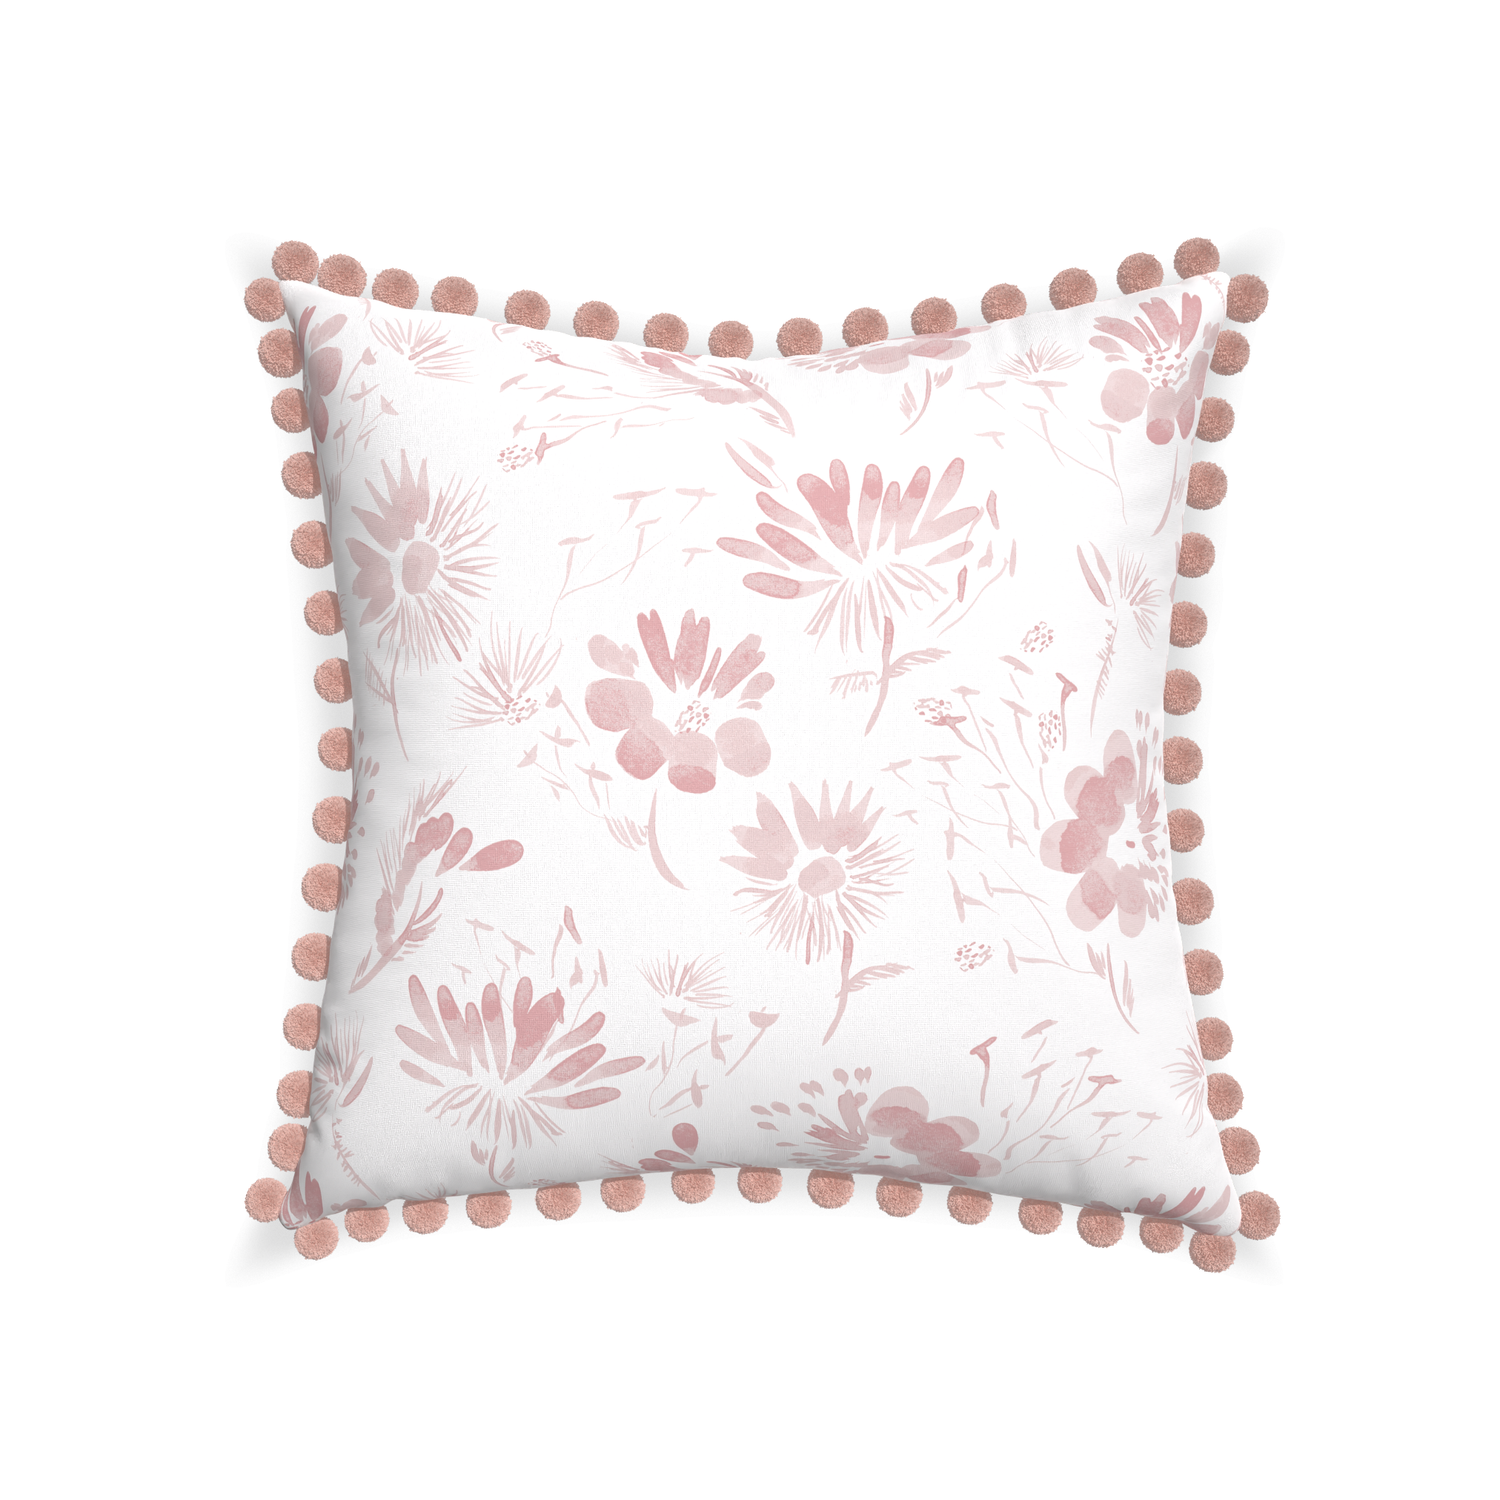 22-square blake custom pink floralpillow with rose pom pom on white background